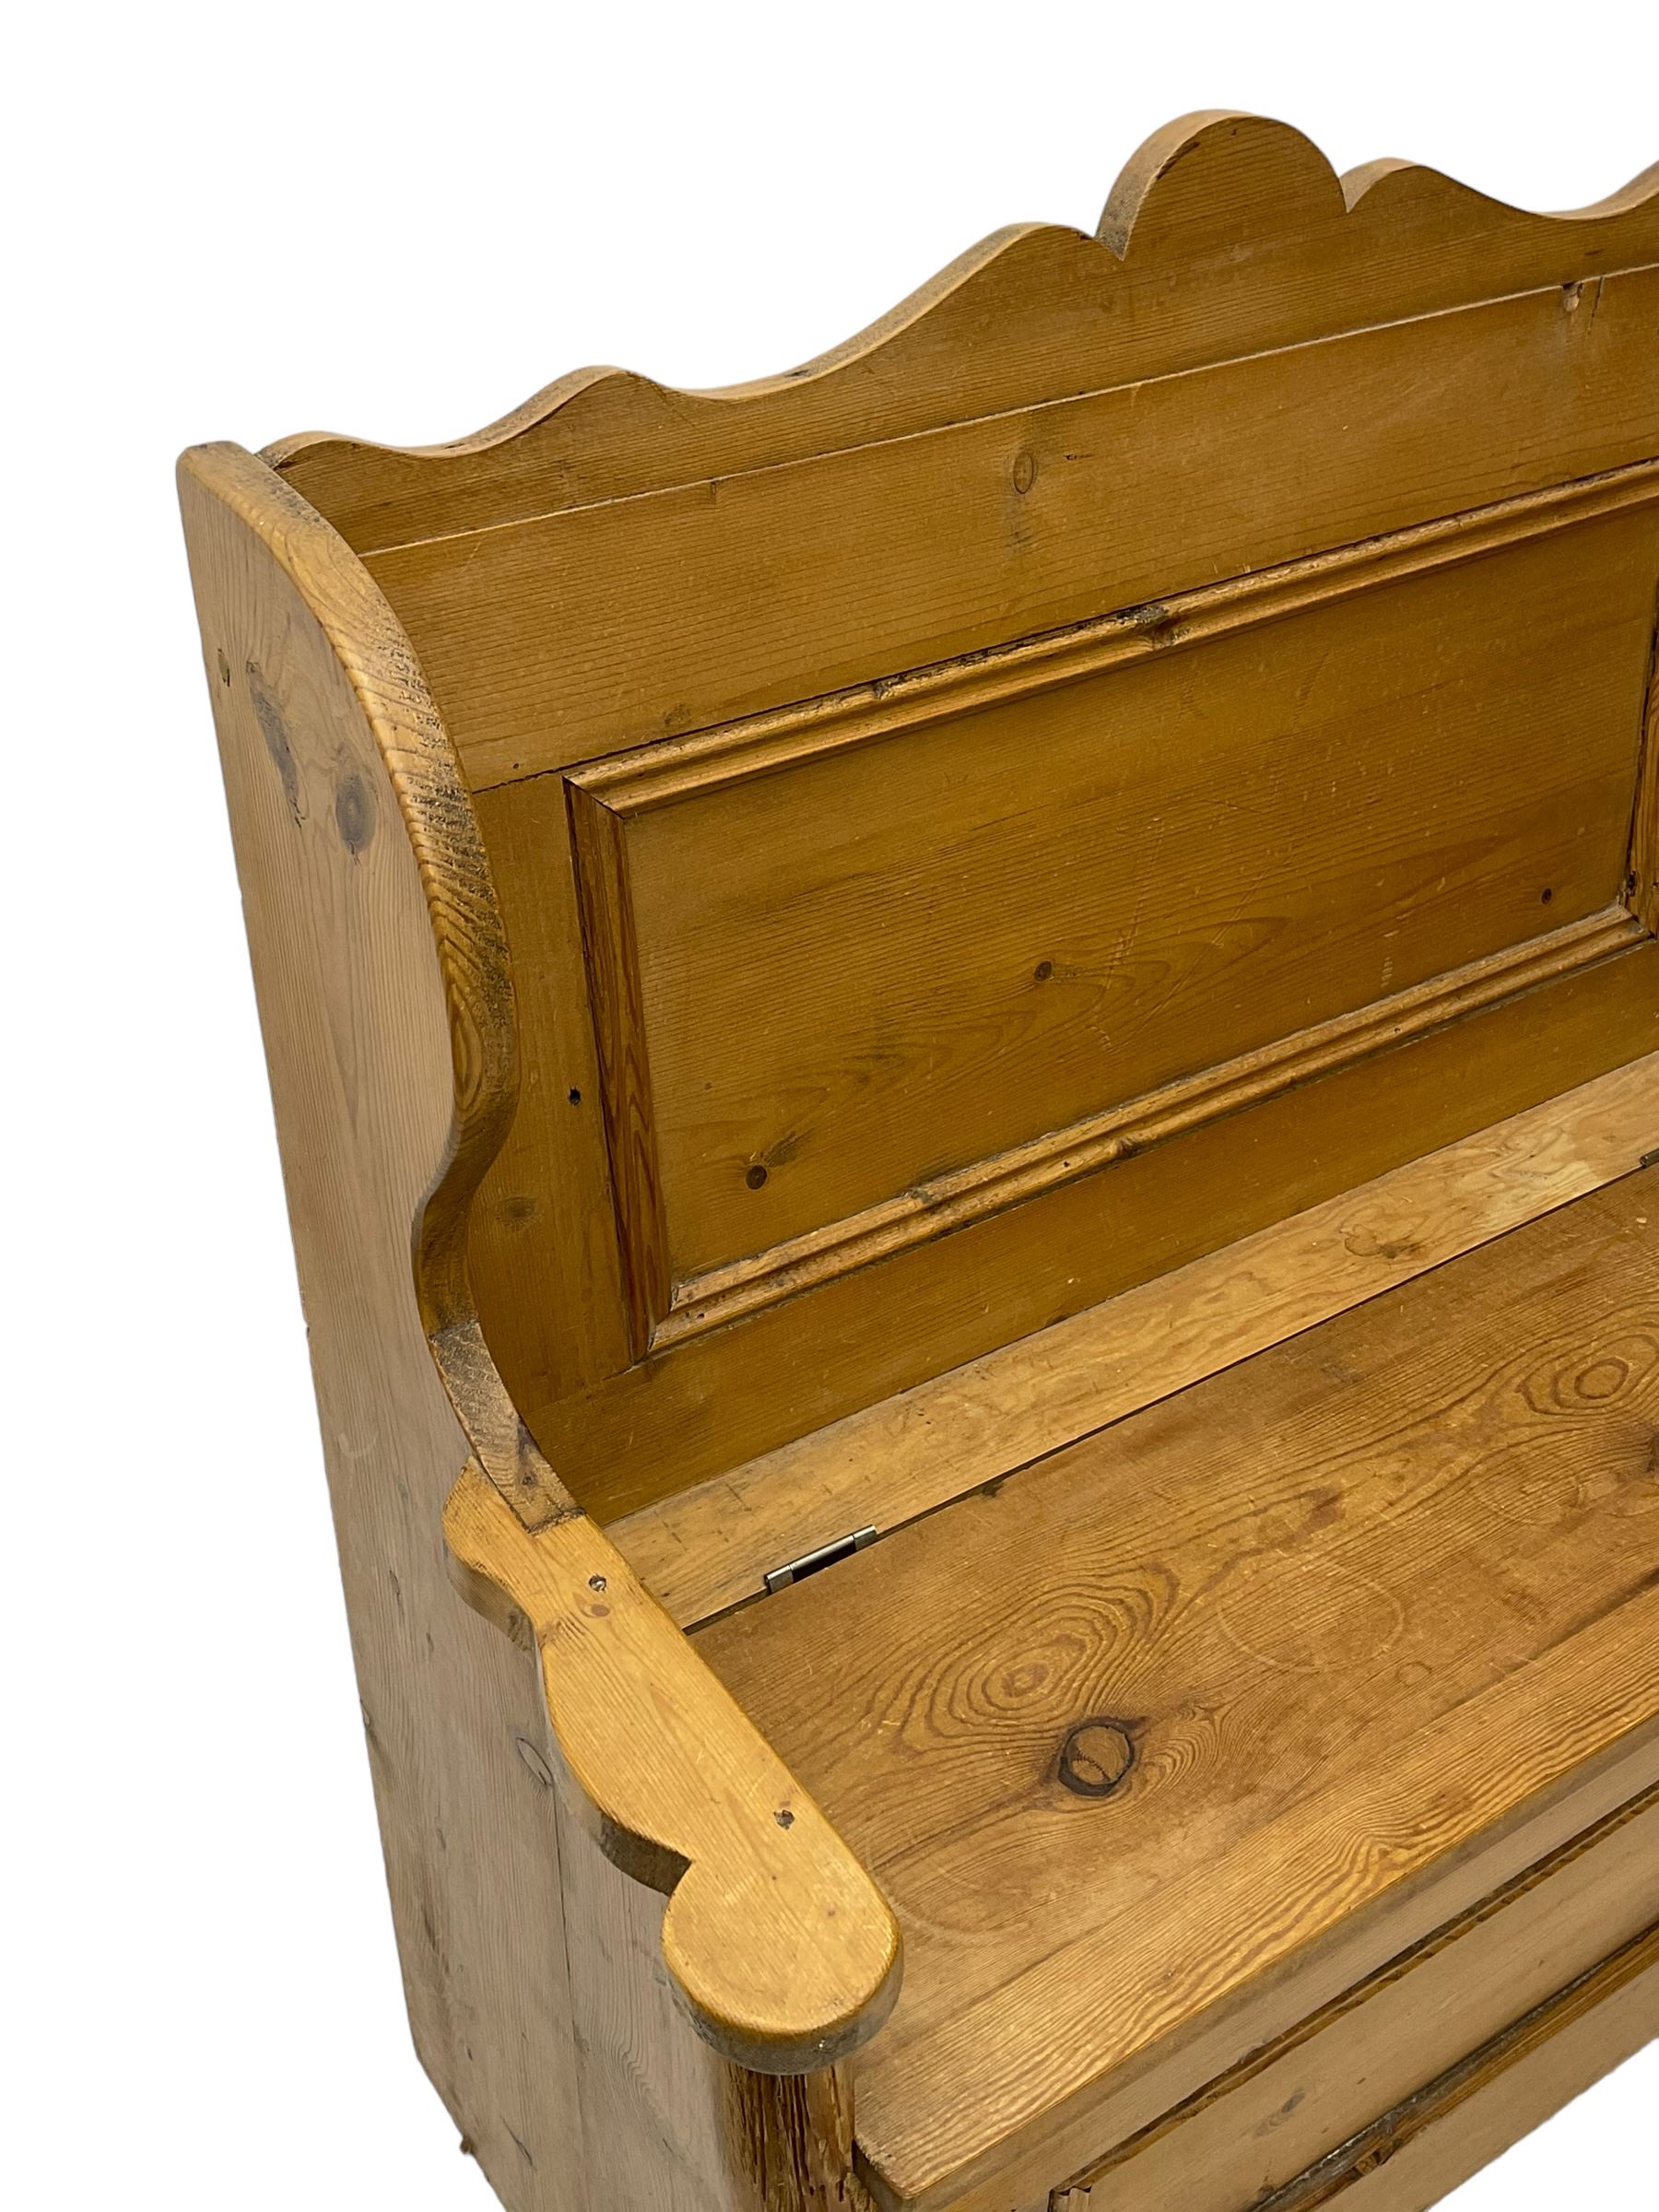 Waxed pine box-seat settle or hall bench - Image 4 of 5